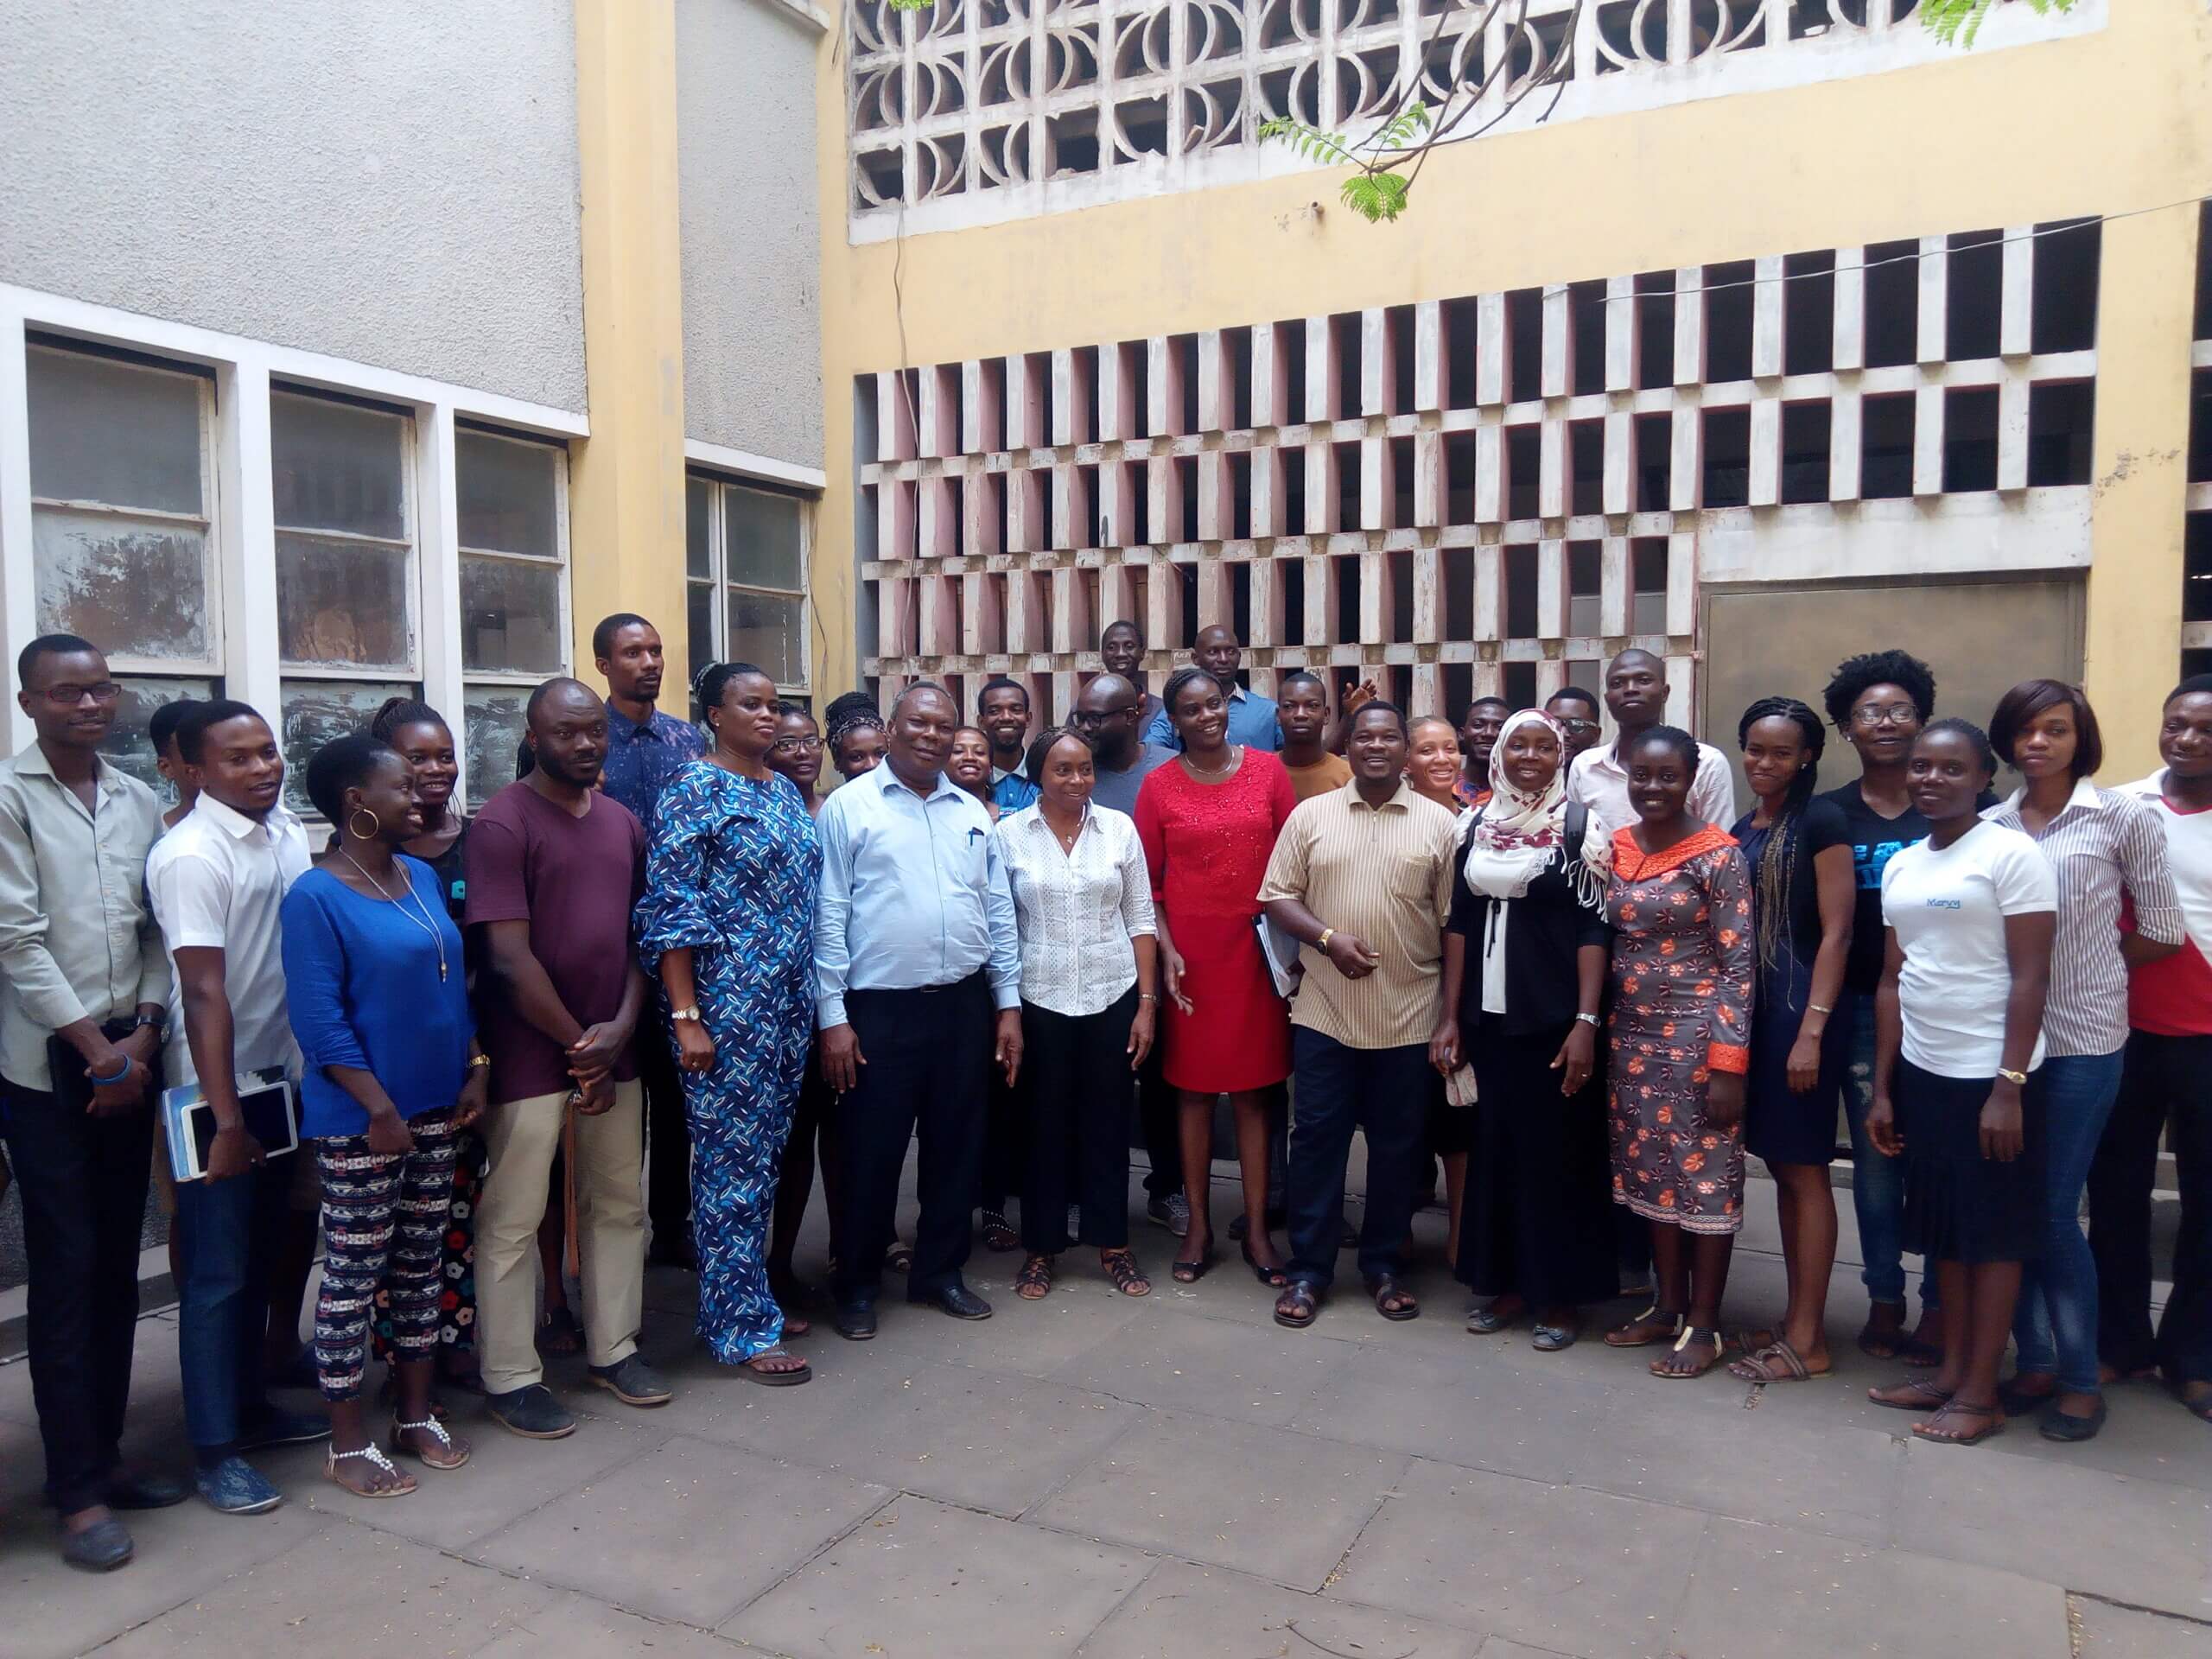 Postgraduate students and faculty in the Department of Zoology at the University of Ibadan